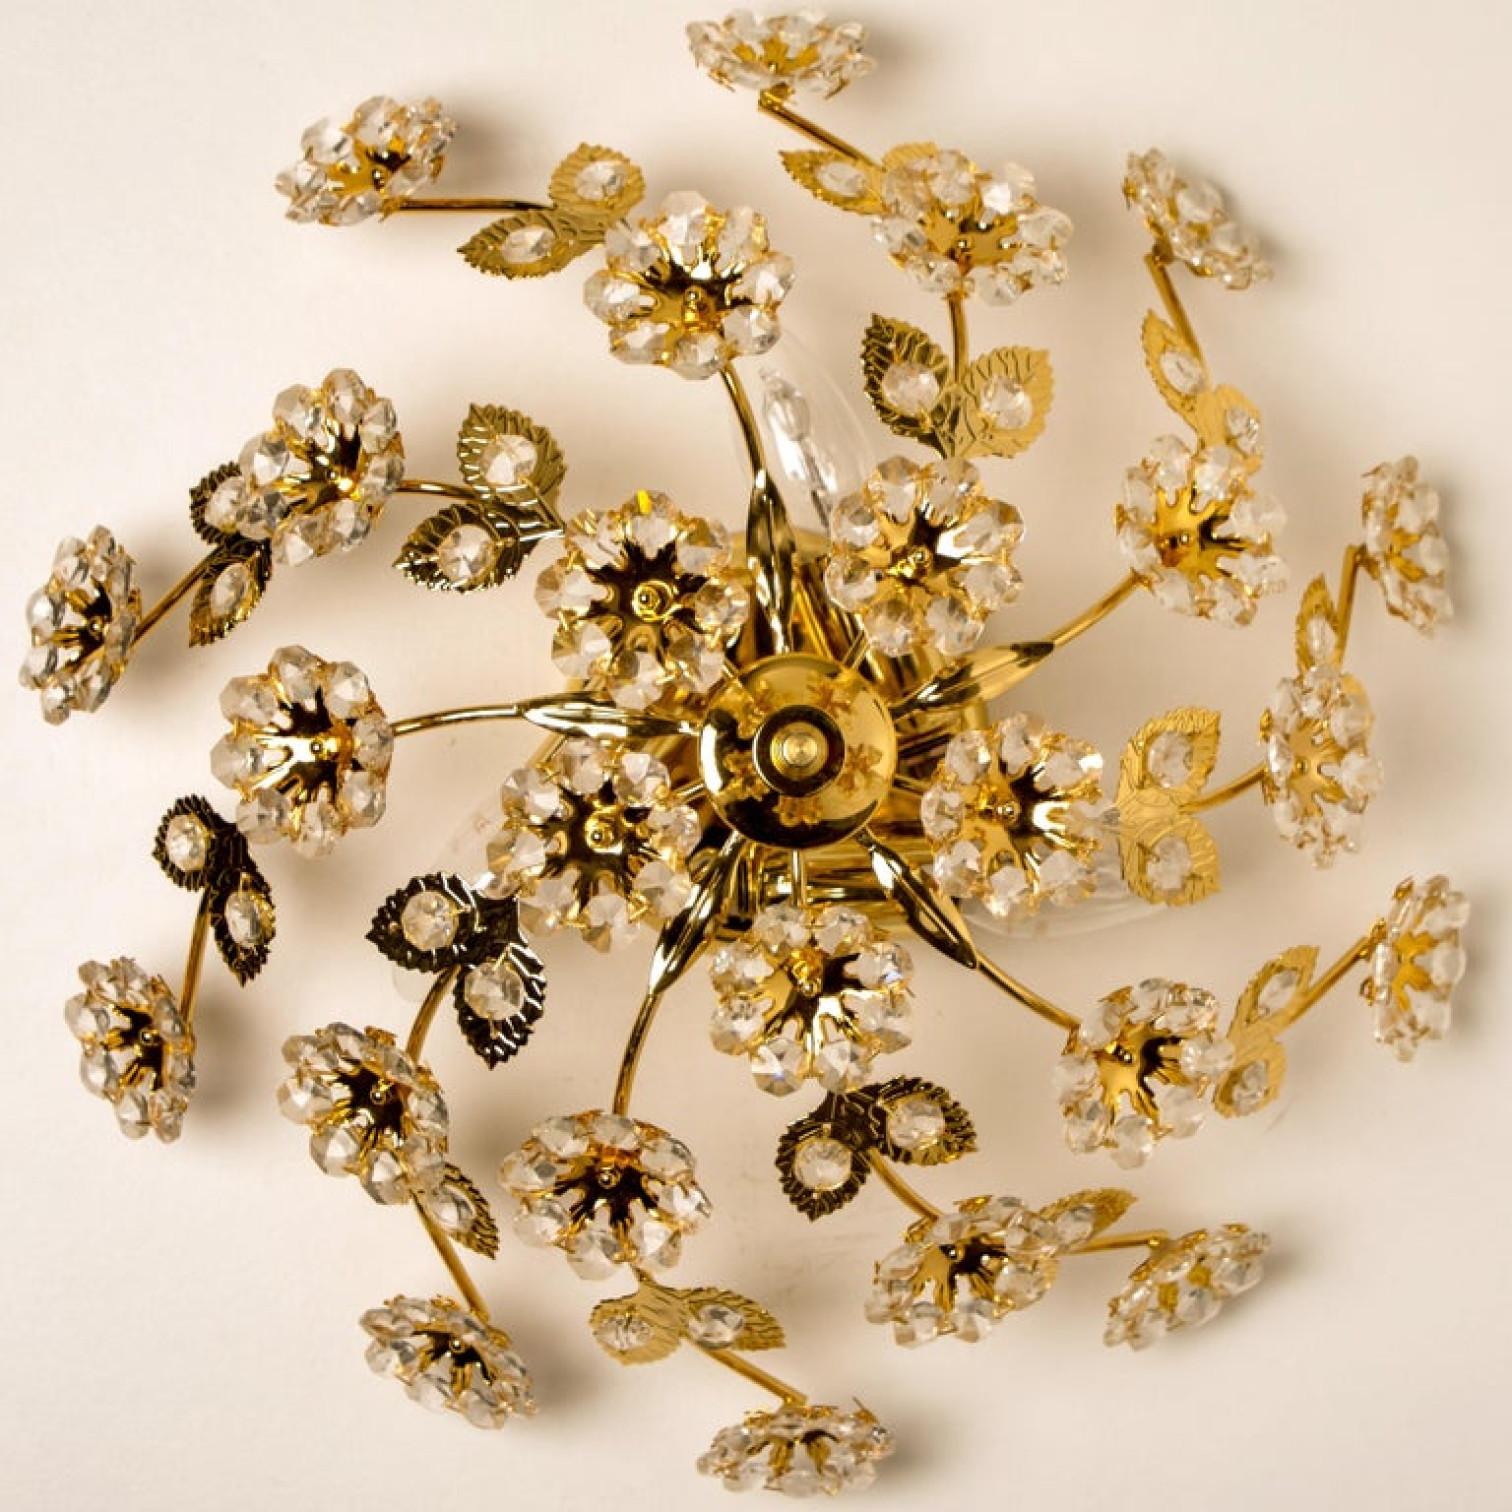 Stunning flower wall light/ flush mount by Palwa, Germany, circa 1965-1975.
A luxurious of light fixture with beautifully cut flower crystals on a gold plated brass frame.

Please notice the price is for one, 3 pieces available.
In very good